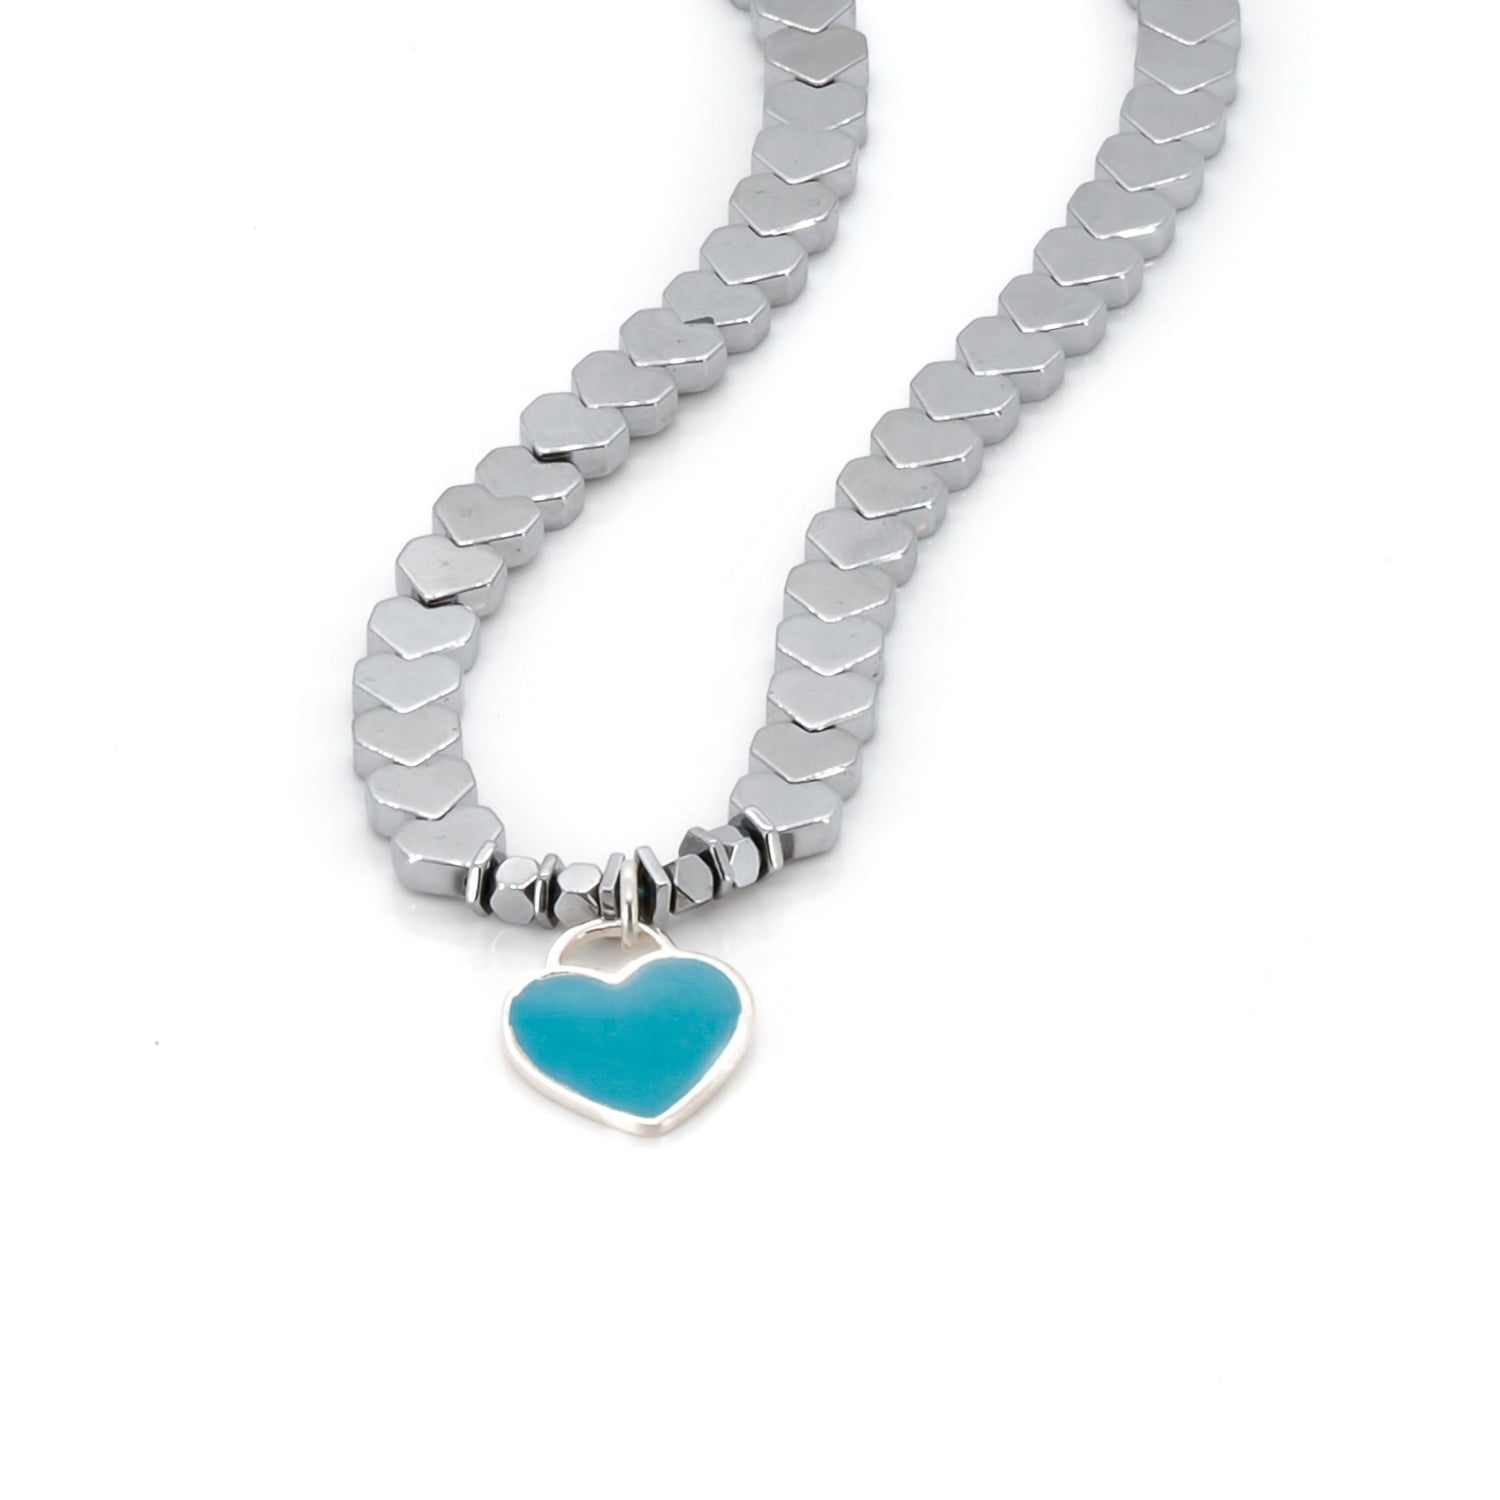 Stylish Heart Pendant Necklace featuring silver hematite beads and a turquoise enamel charm, perfect for special occasions